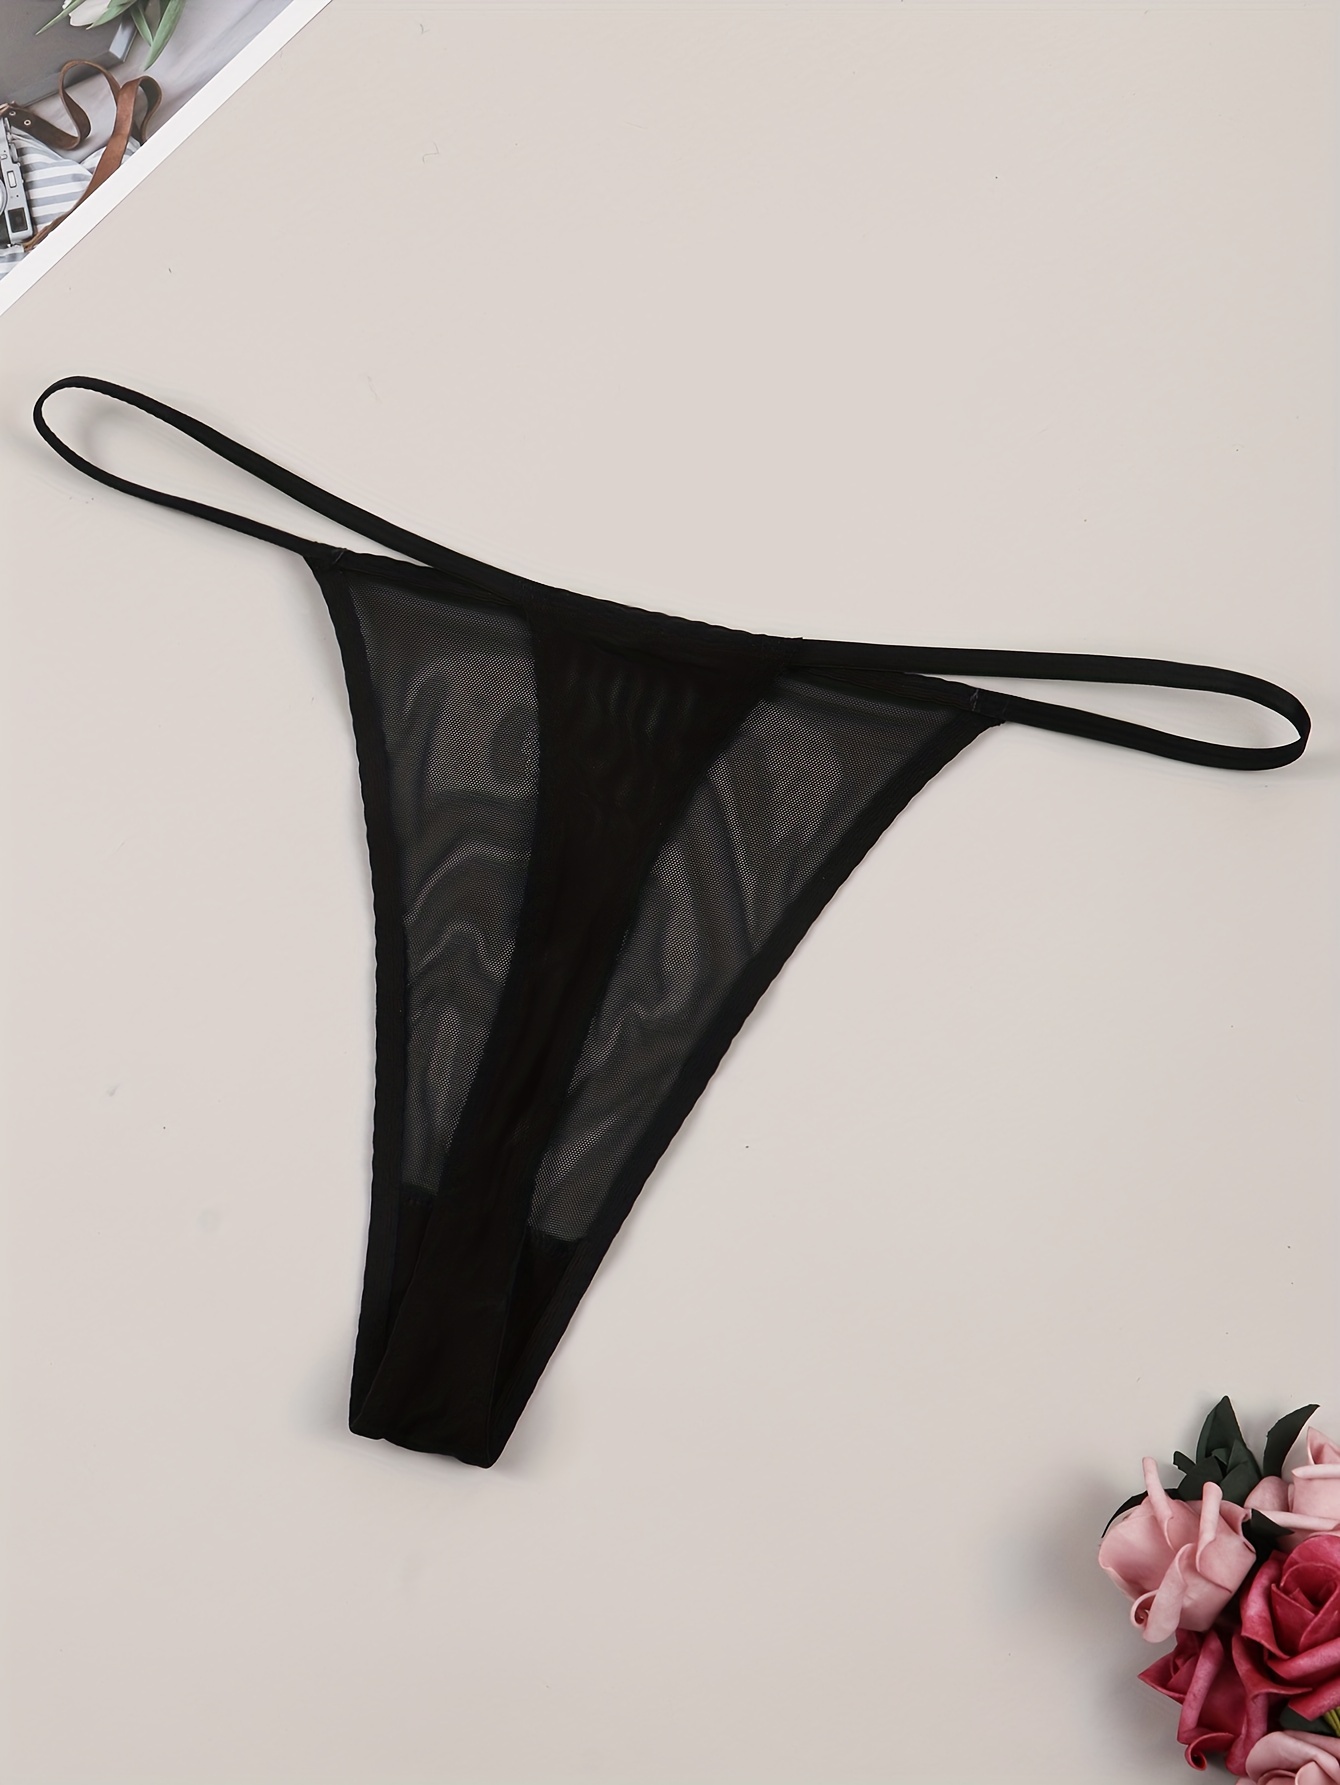 G-String T-back Lingerie Sexy Briefs Underwear Thong Sheer